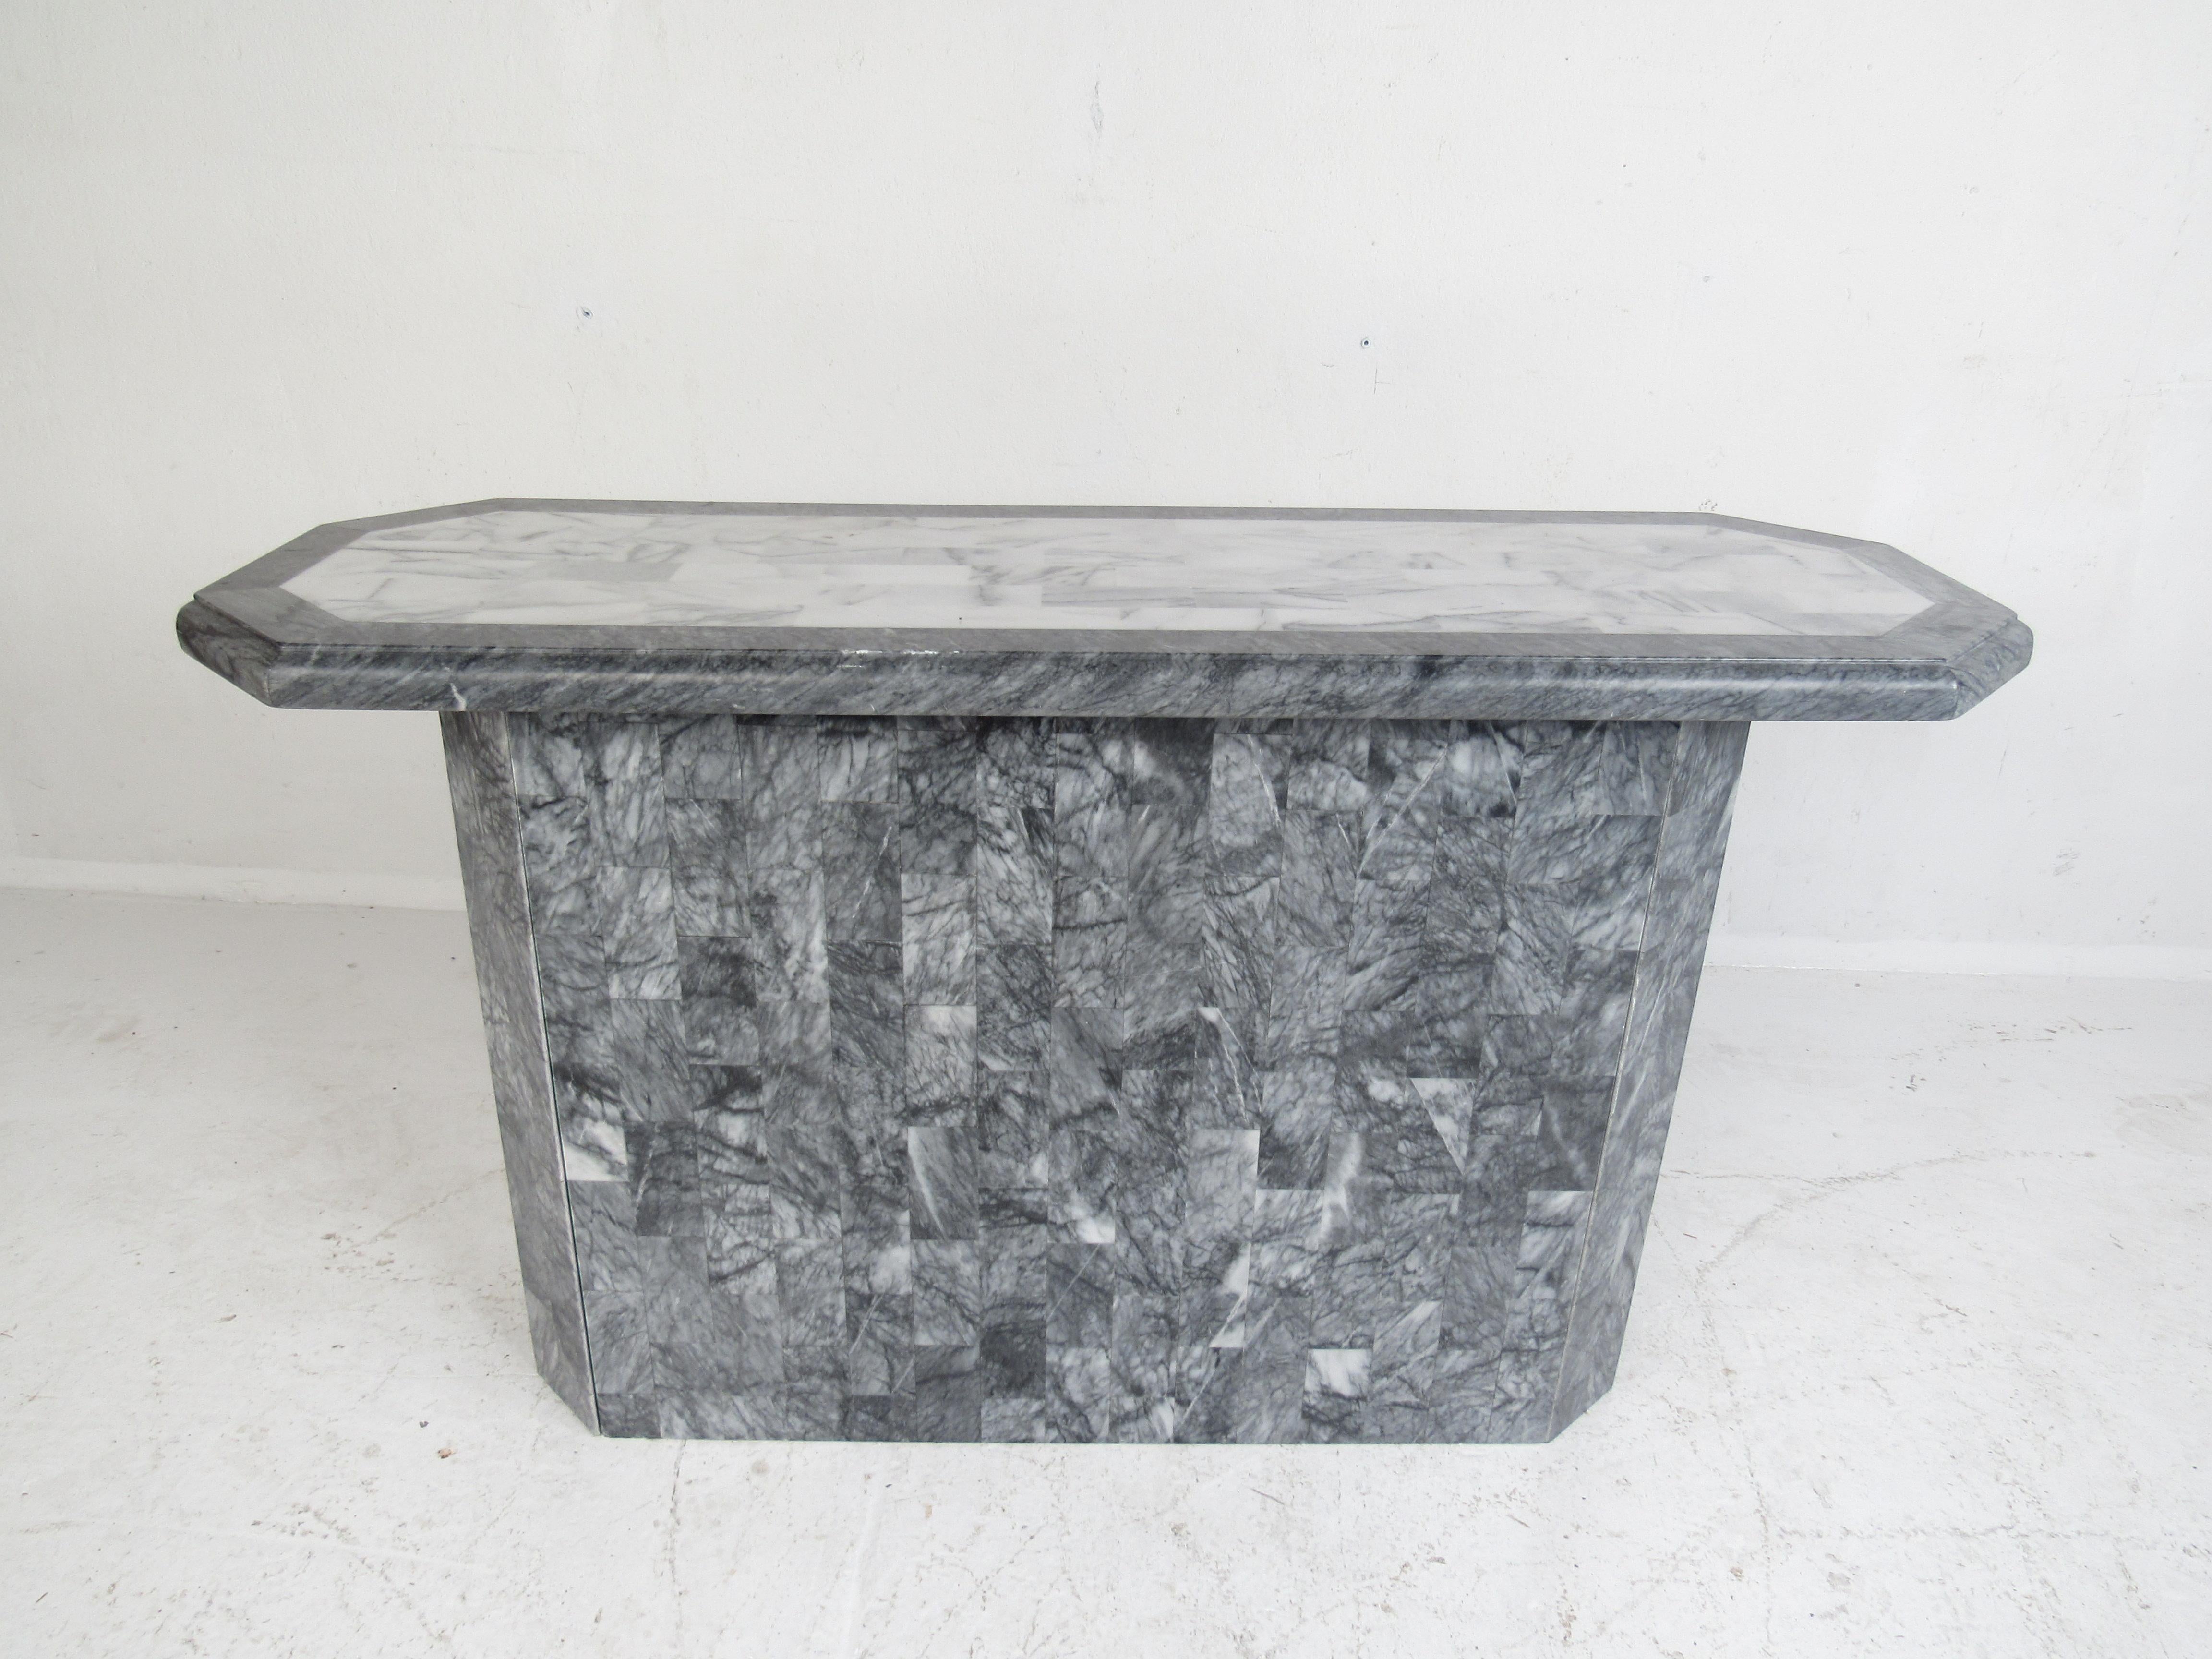 A stunning two-tone design with light and dark grey tessellated stone. This vintage modern hall table features an unusually shaped top with beveled edges. This versatile piece looks great behind the sofa, in the hallway or in any entryway. Maitland